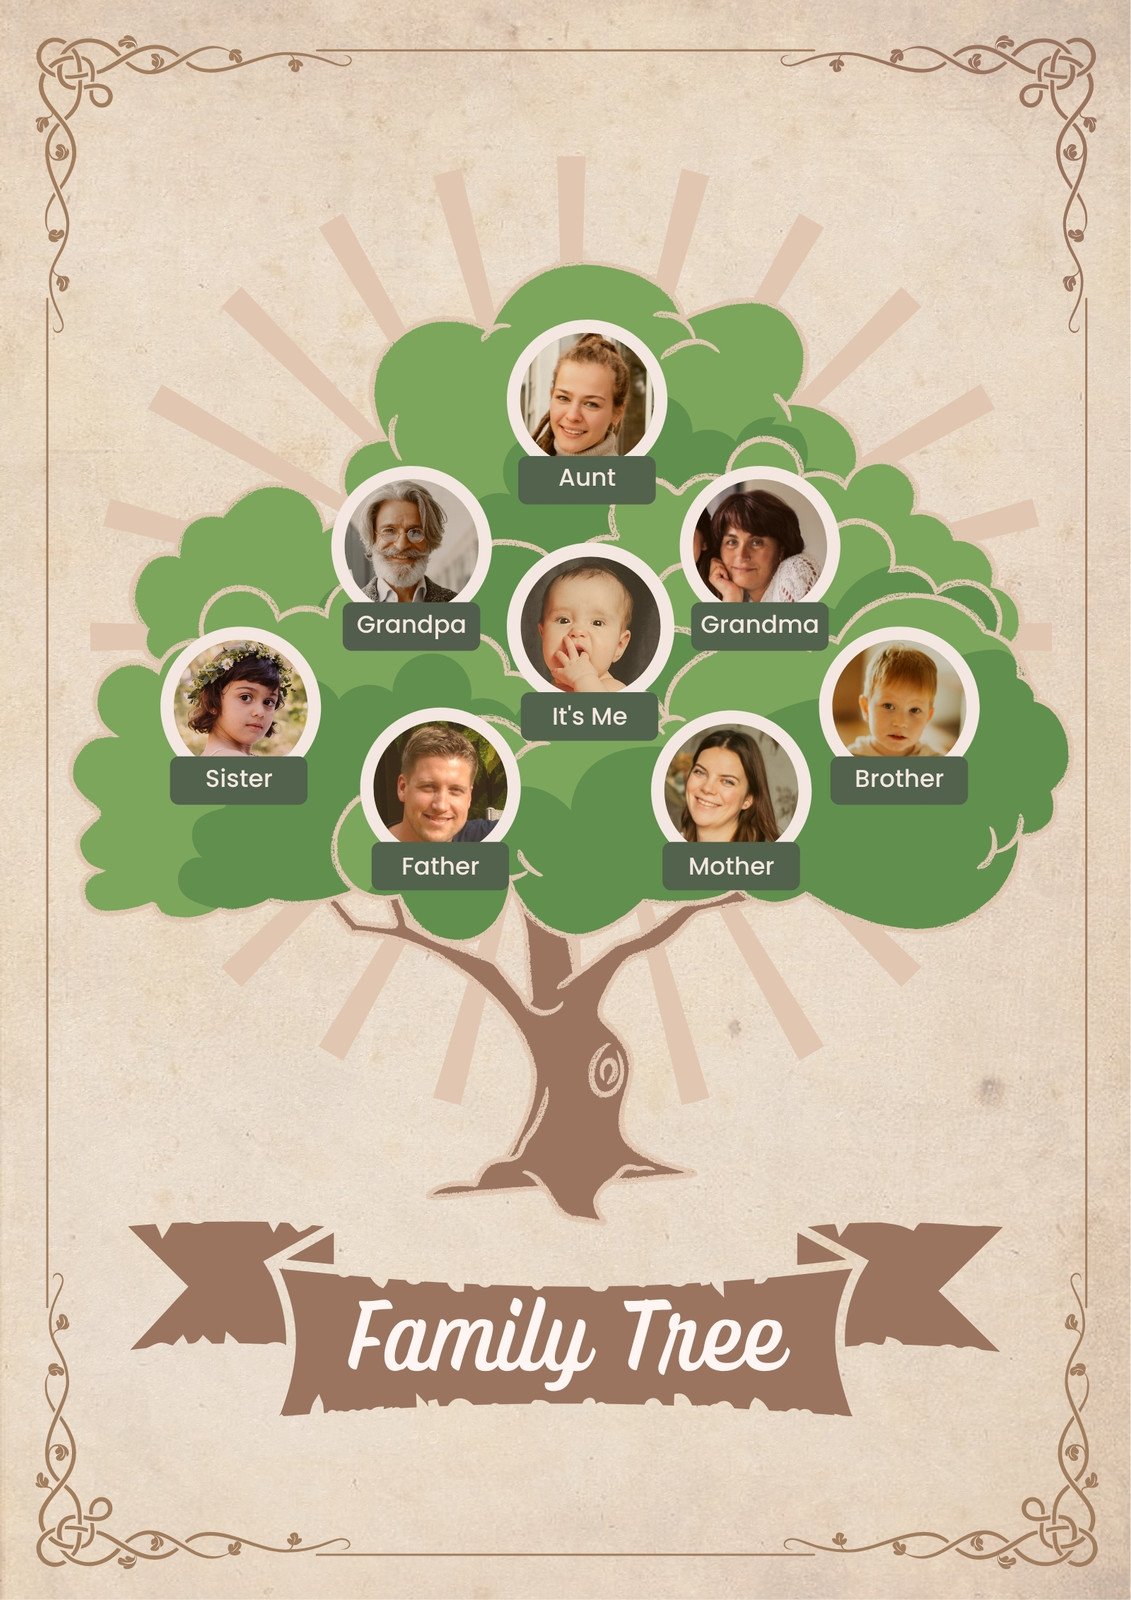 Top 999+ family tree images – Amazing Collection family tree images Full 4K